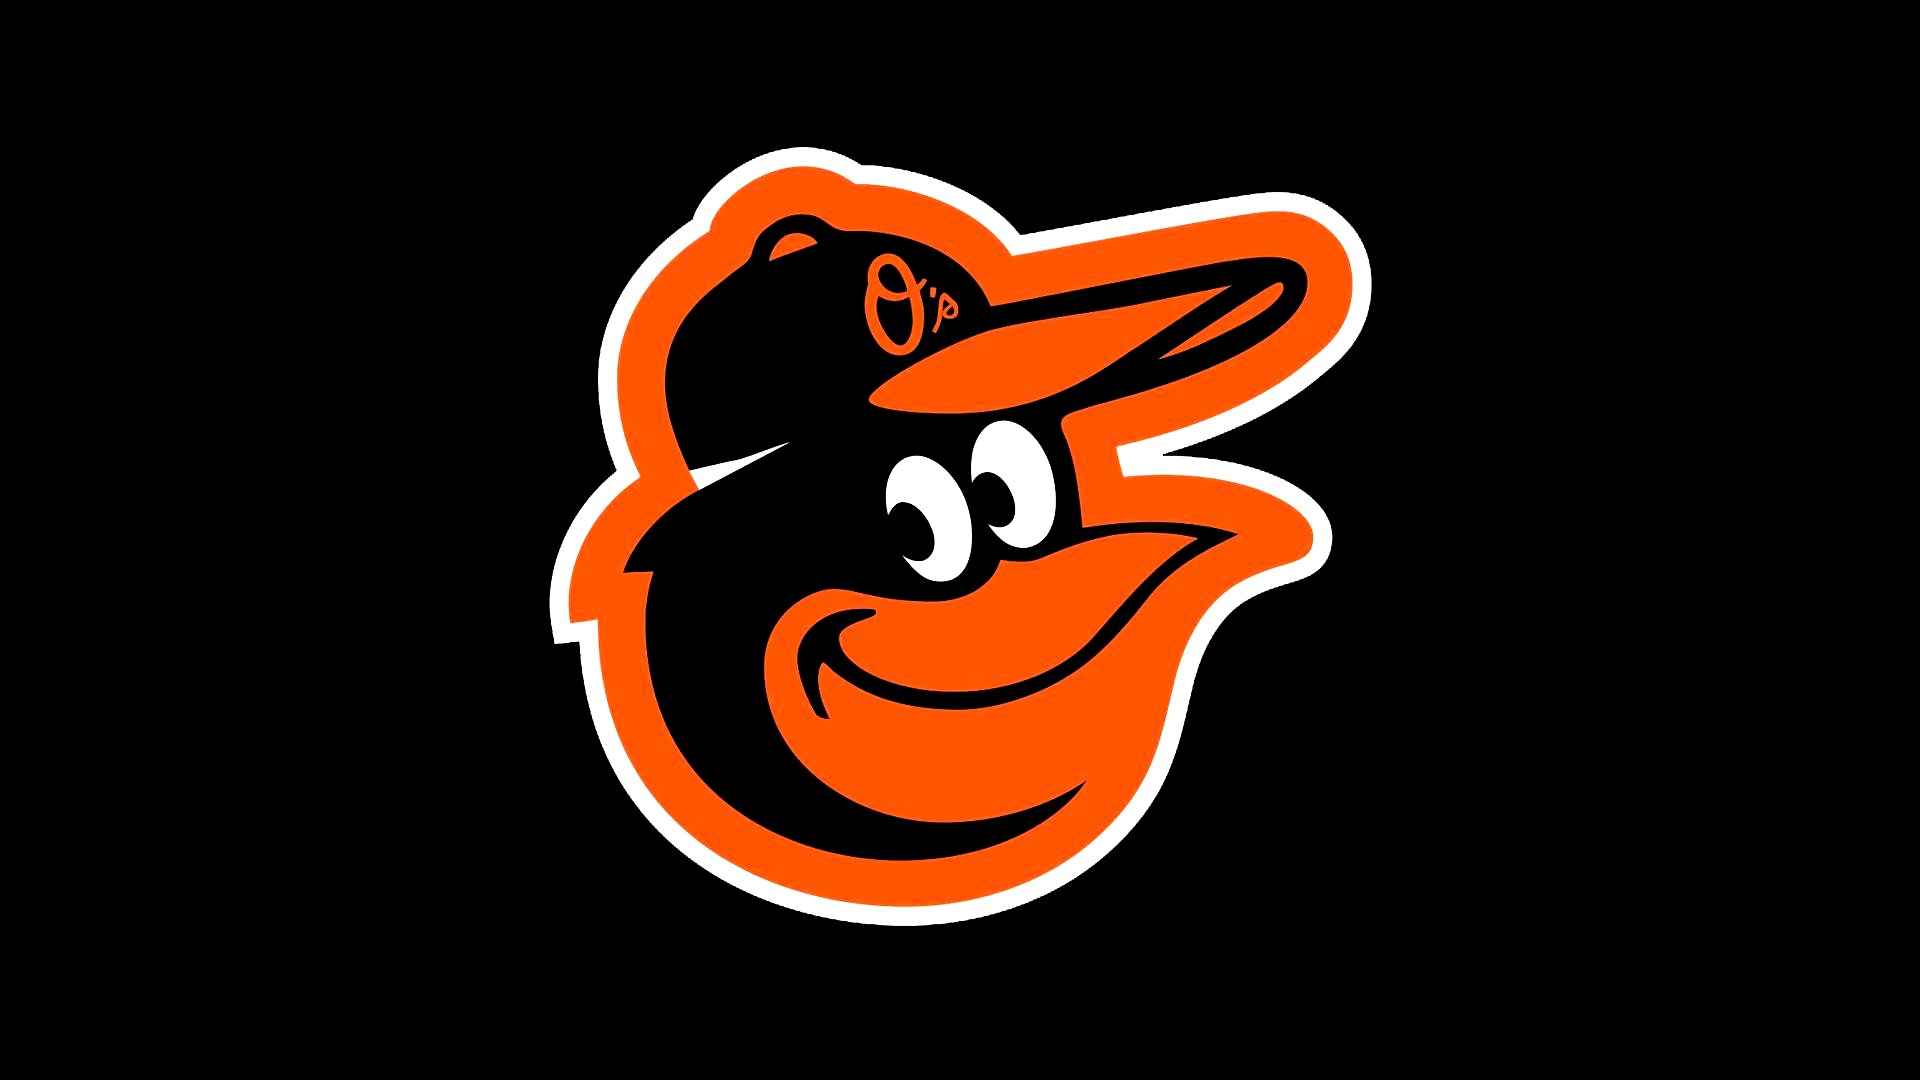 Baltimore Orioles HD Wallpapers With high-resolution 1920X1080 pixel. You can use this wallpaper for Mac Desktop Wallpaper, Laptop Screensavers, Android Wallpapers, Tablet or iPhone Home Screen and another mobile phone device